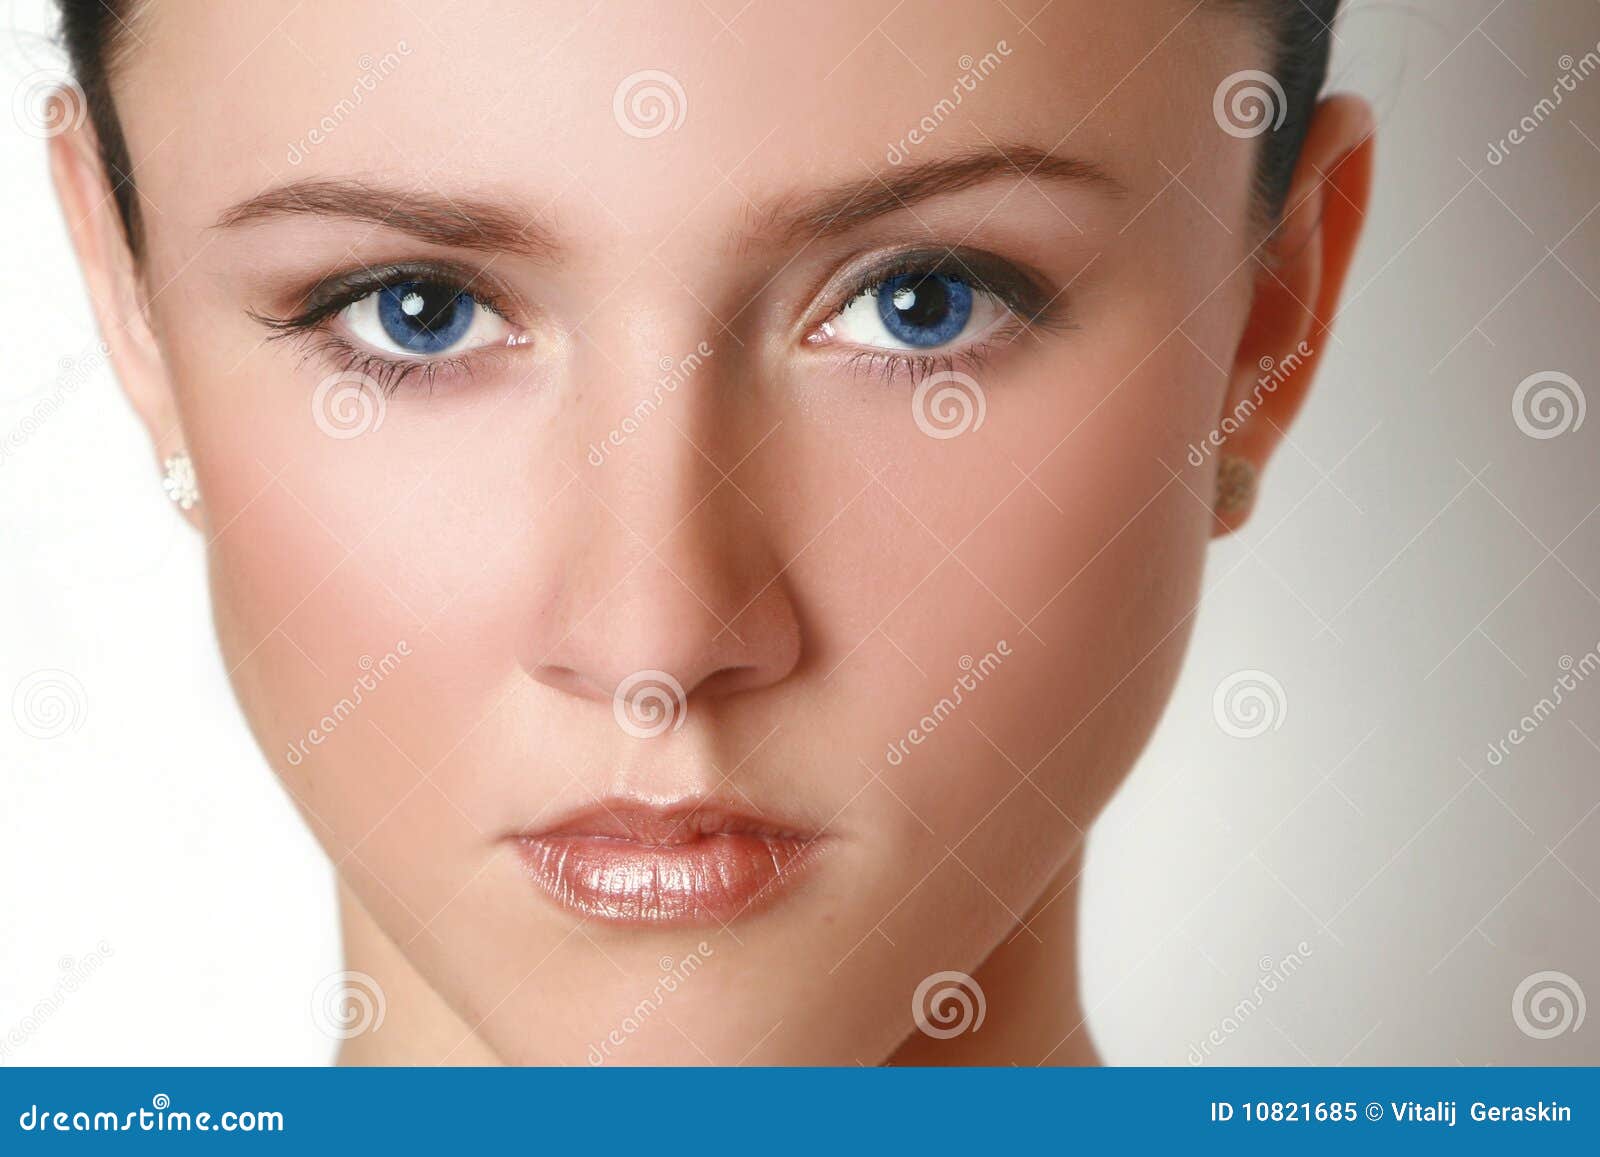 Close Up Portrait Of Attractive Woman Stock Image Image Of Brunette